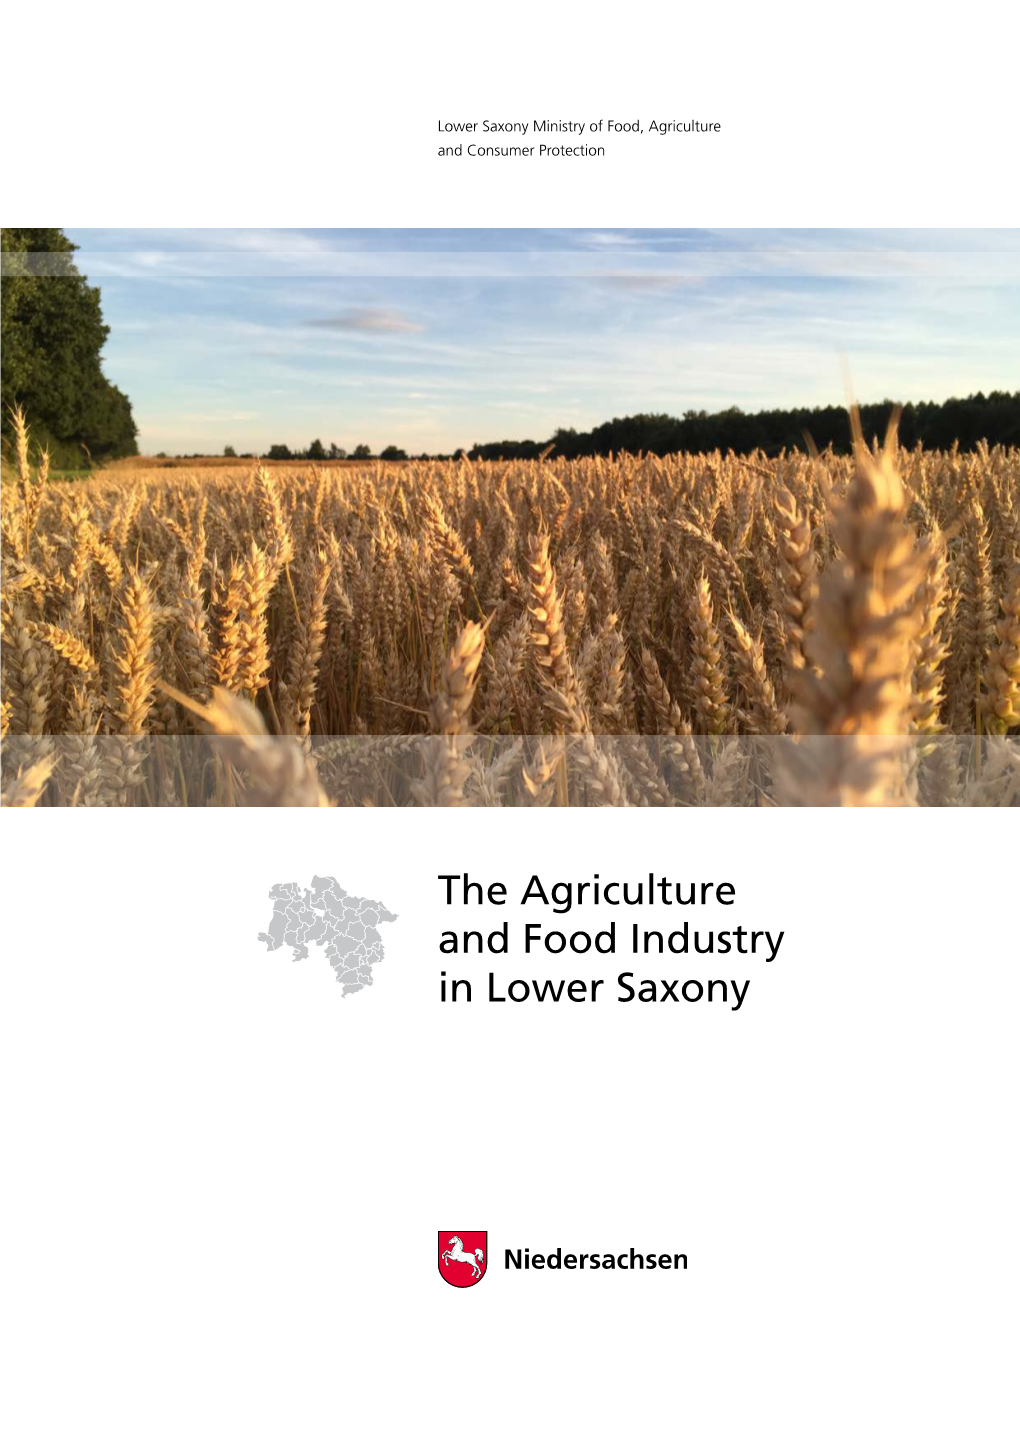 The Agriculture and Food Industry in Lower Saxony the Agriculture and Food Industry in Lower Saxony